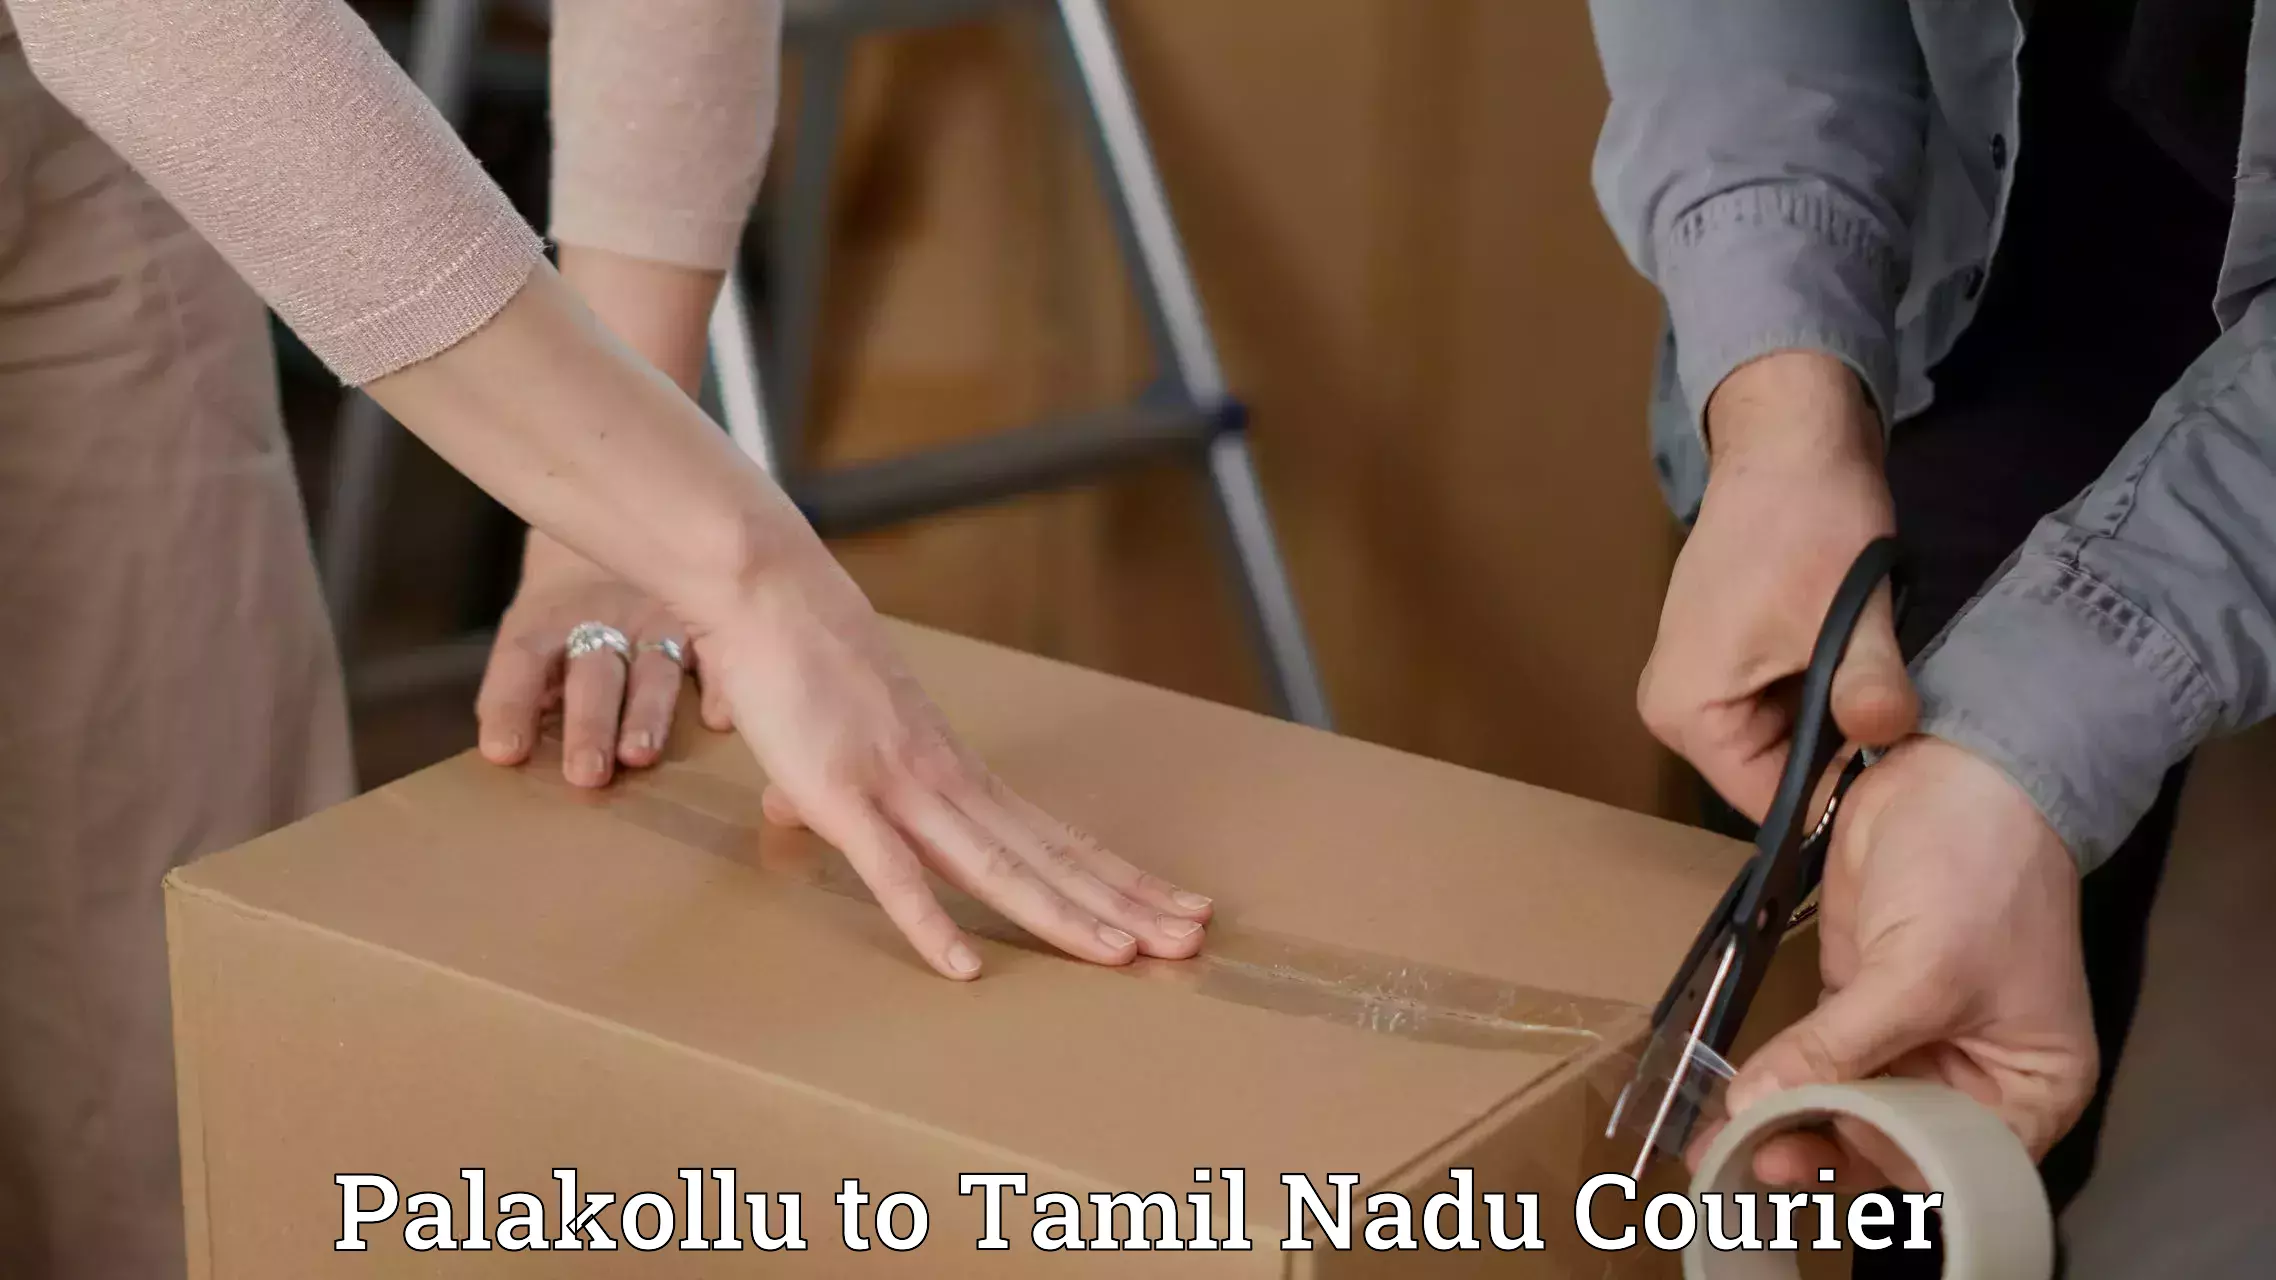 Professional courier services Palakollu to Chennai Port